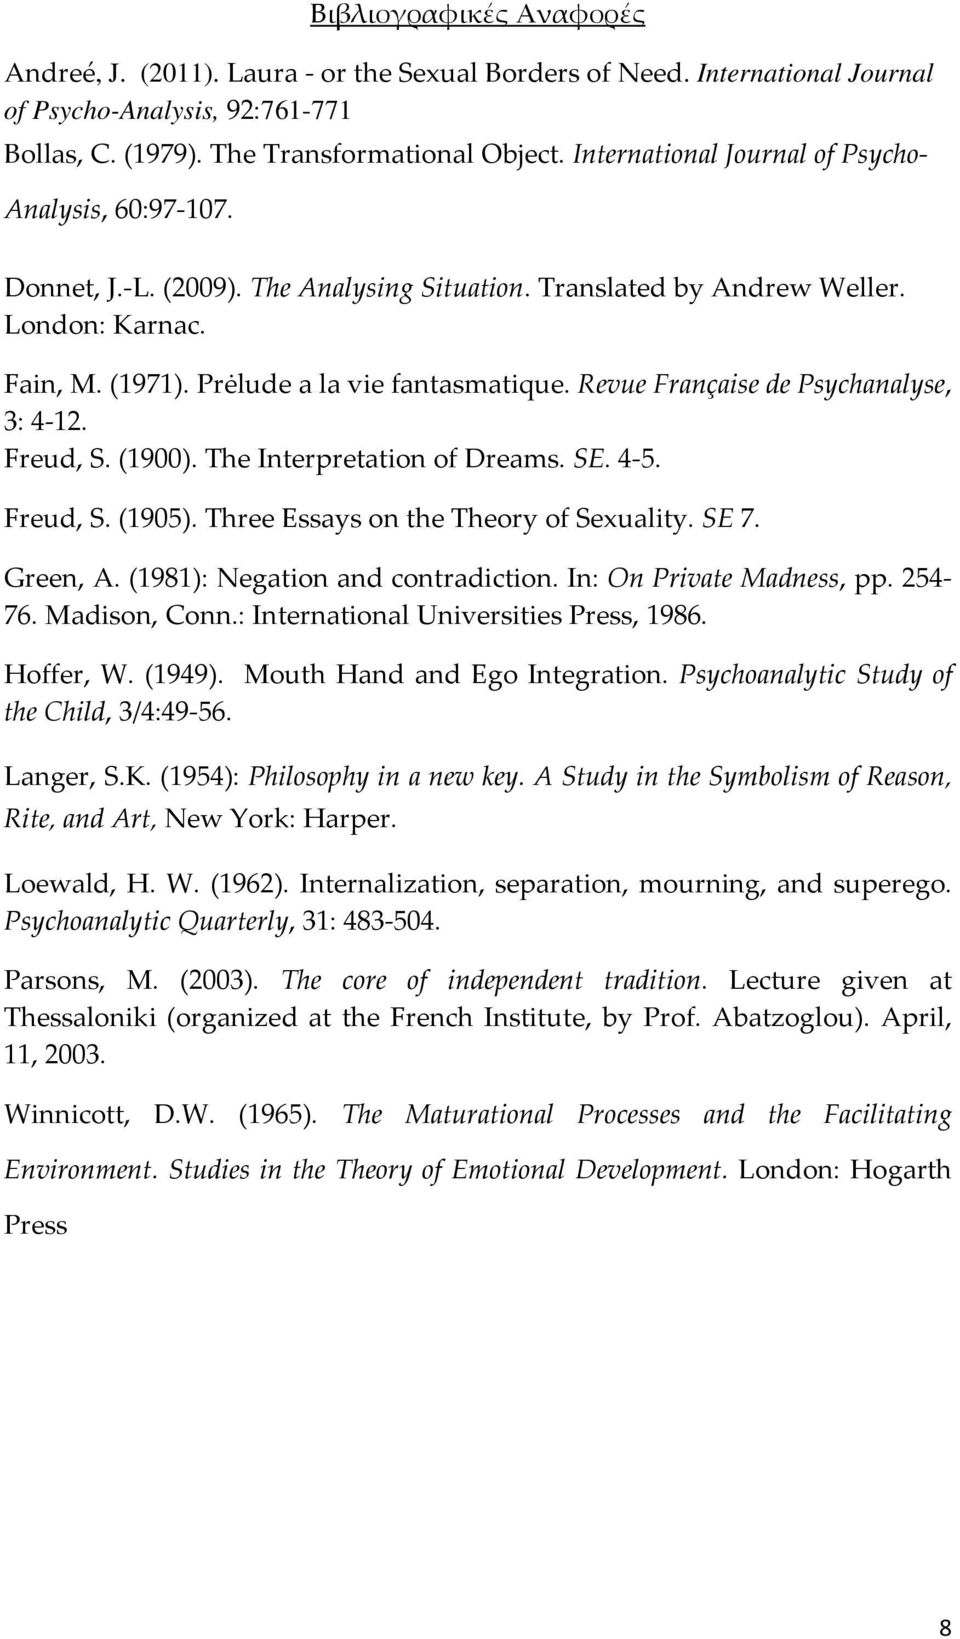 Revue Française de Psychanalyse, 3: 4-12. Freud, S. (1900). The Interpretation of Dreams. SE. 4-5. Freud, S. (1905). Three Essays on the Theory of Sexuality. SE 7. Green, A.